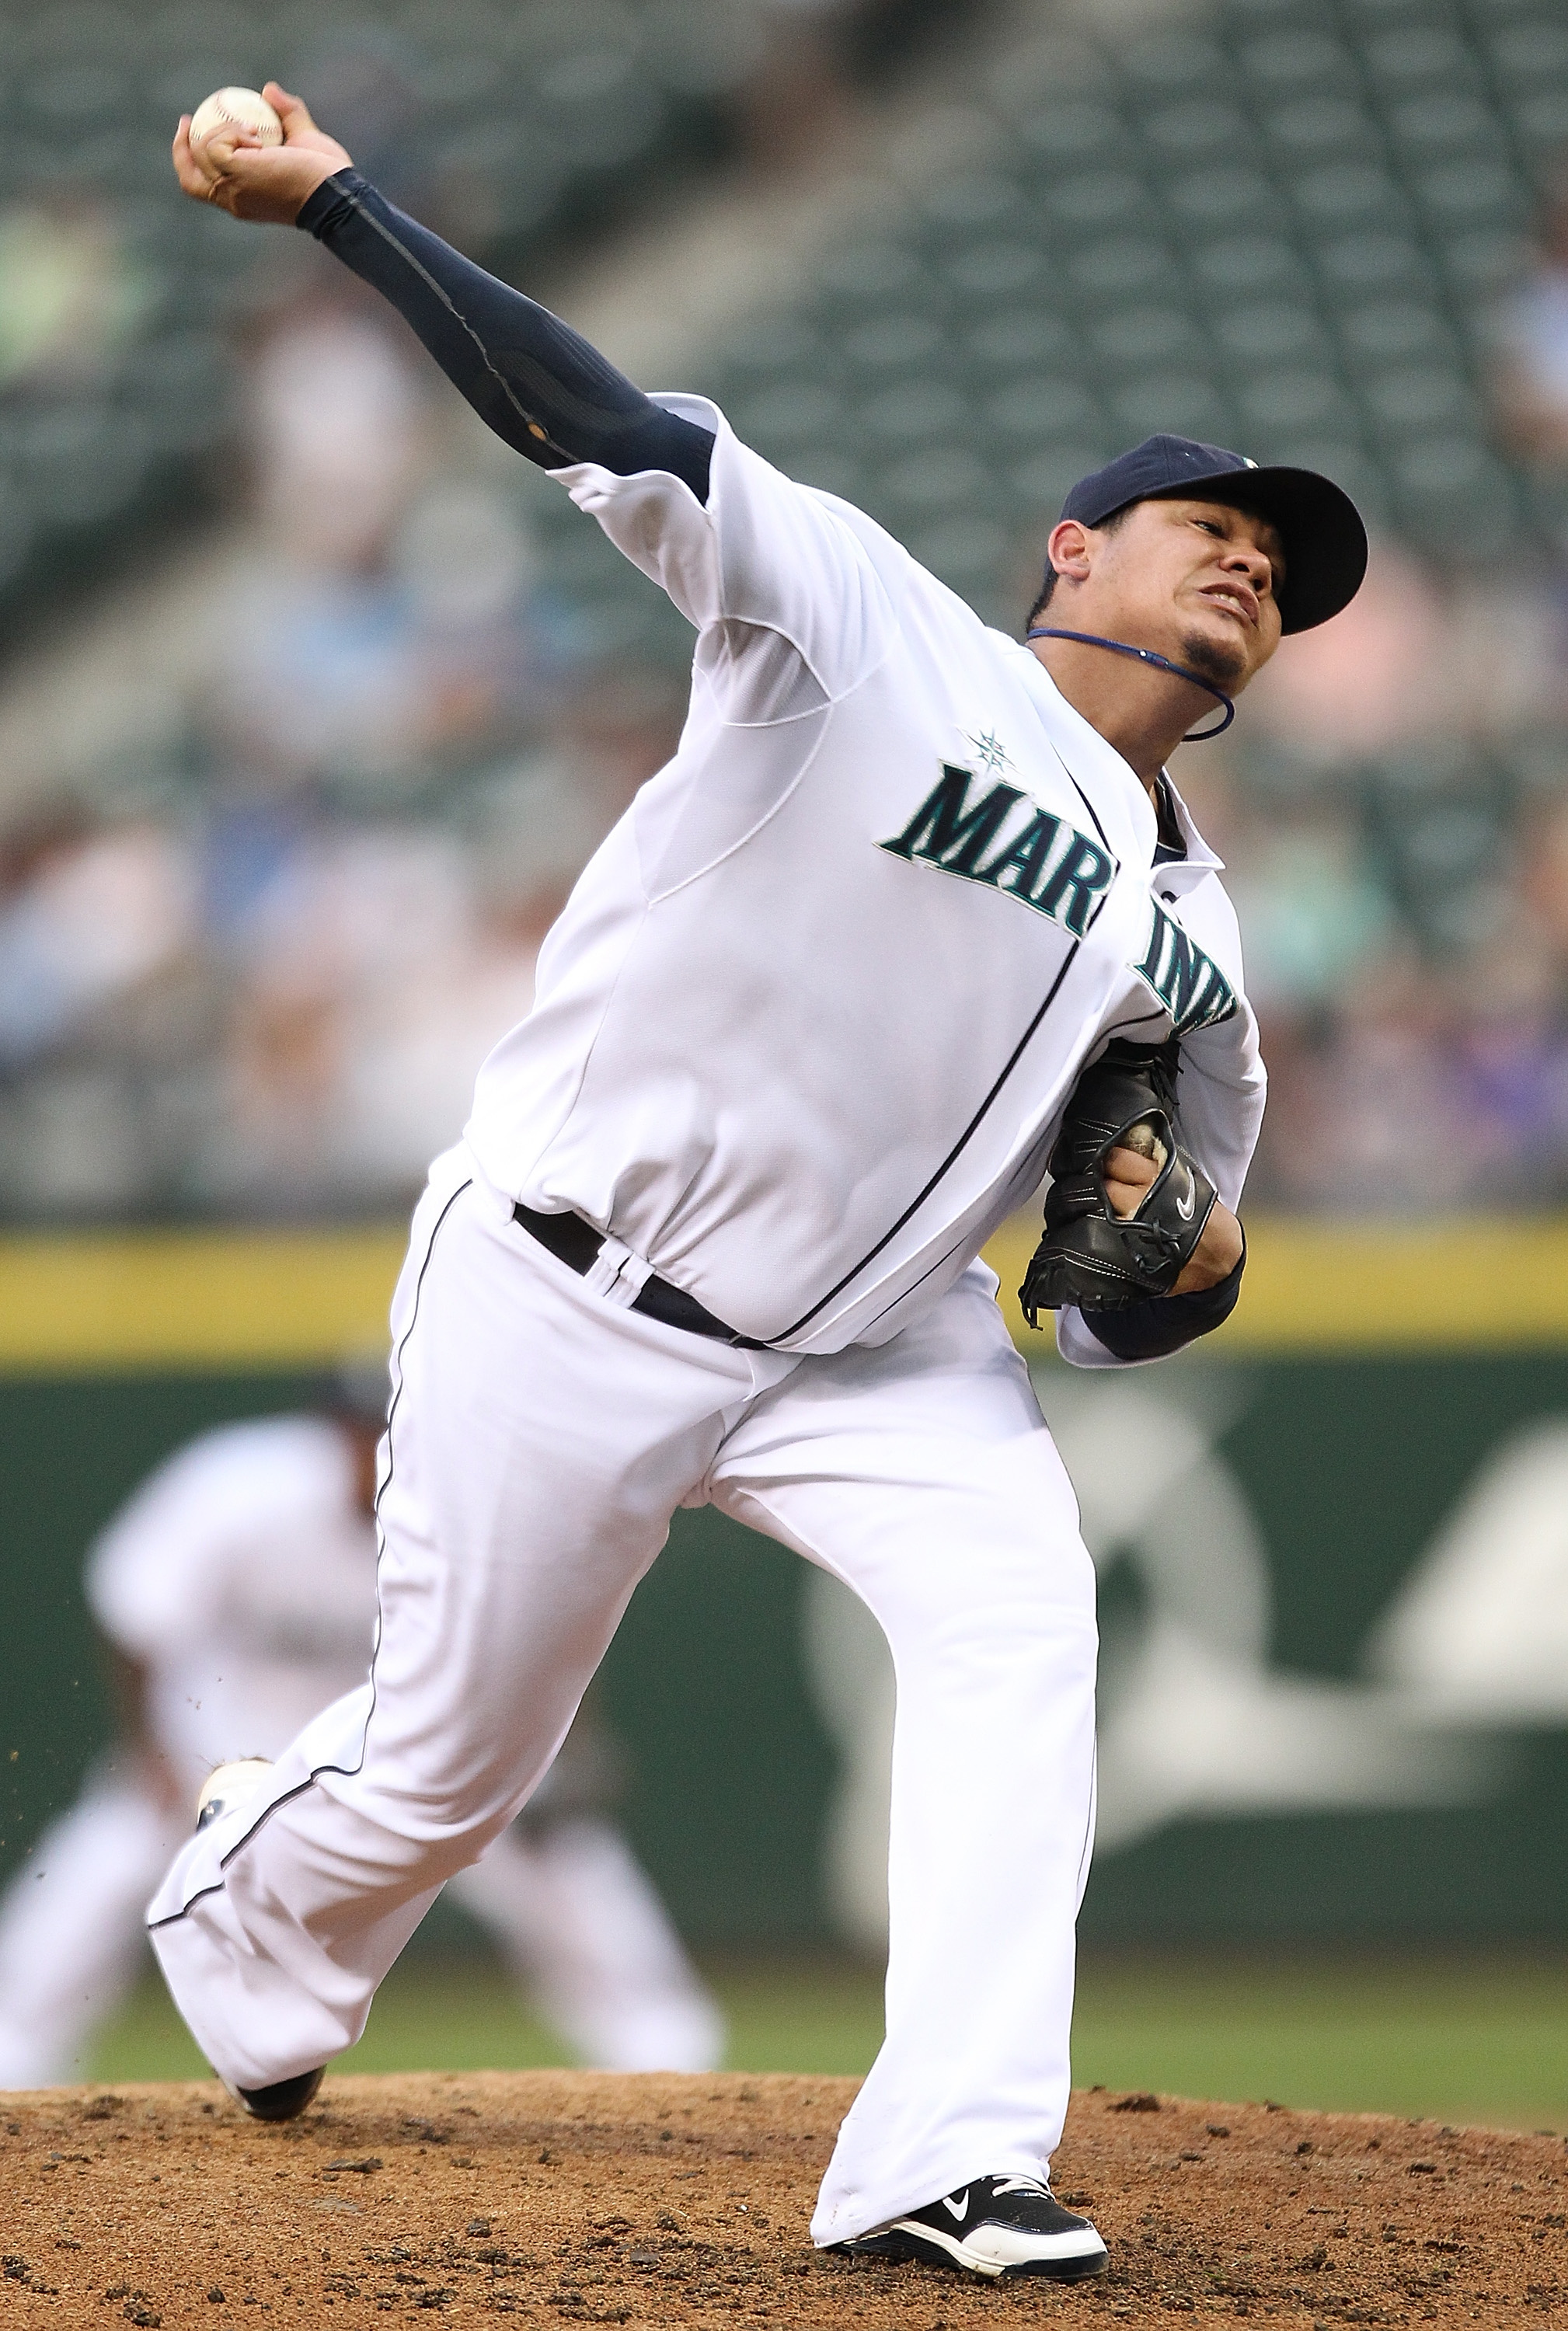 Seattle Mariners pitcher Felix Hernandez sets tone for team's